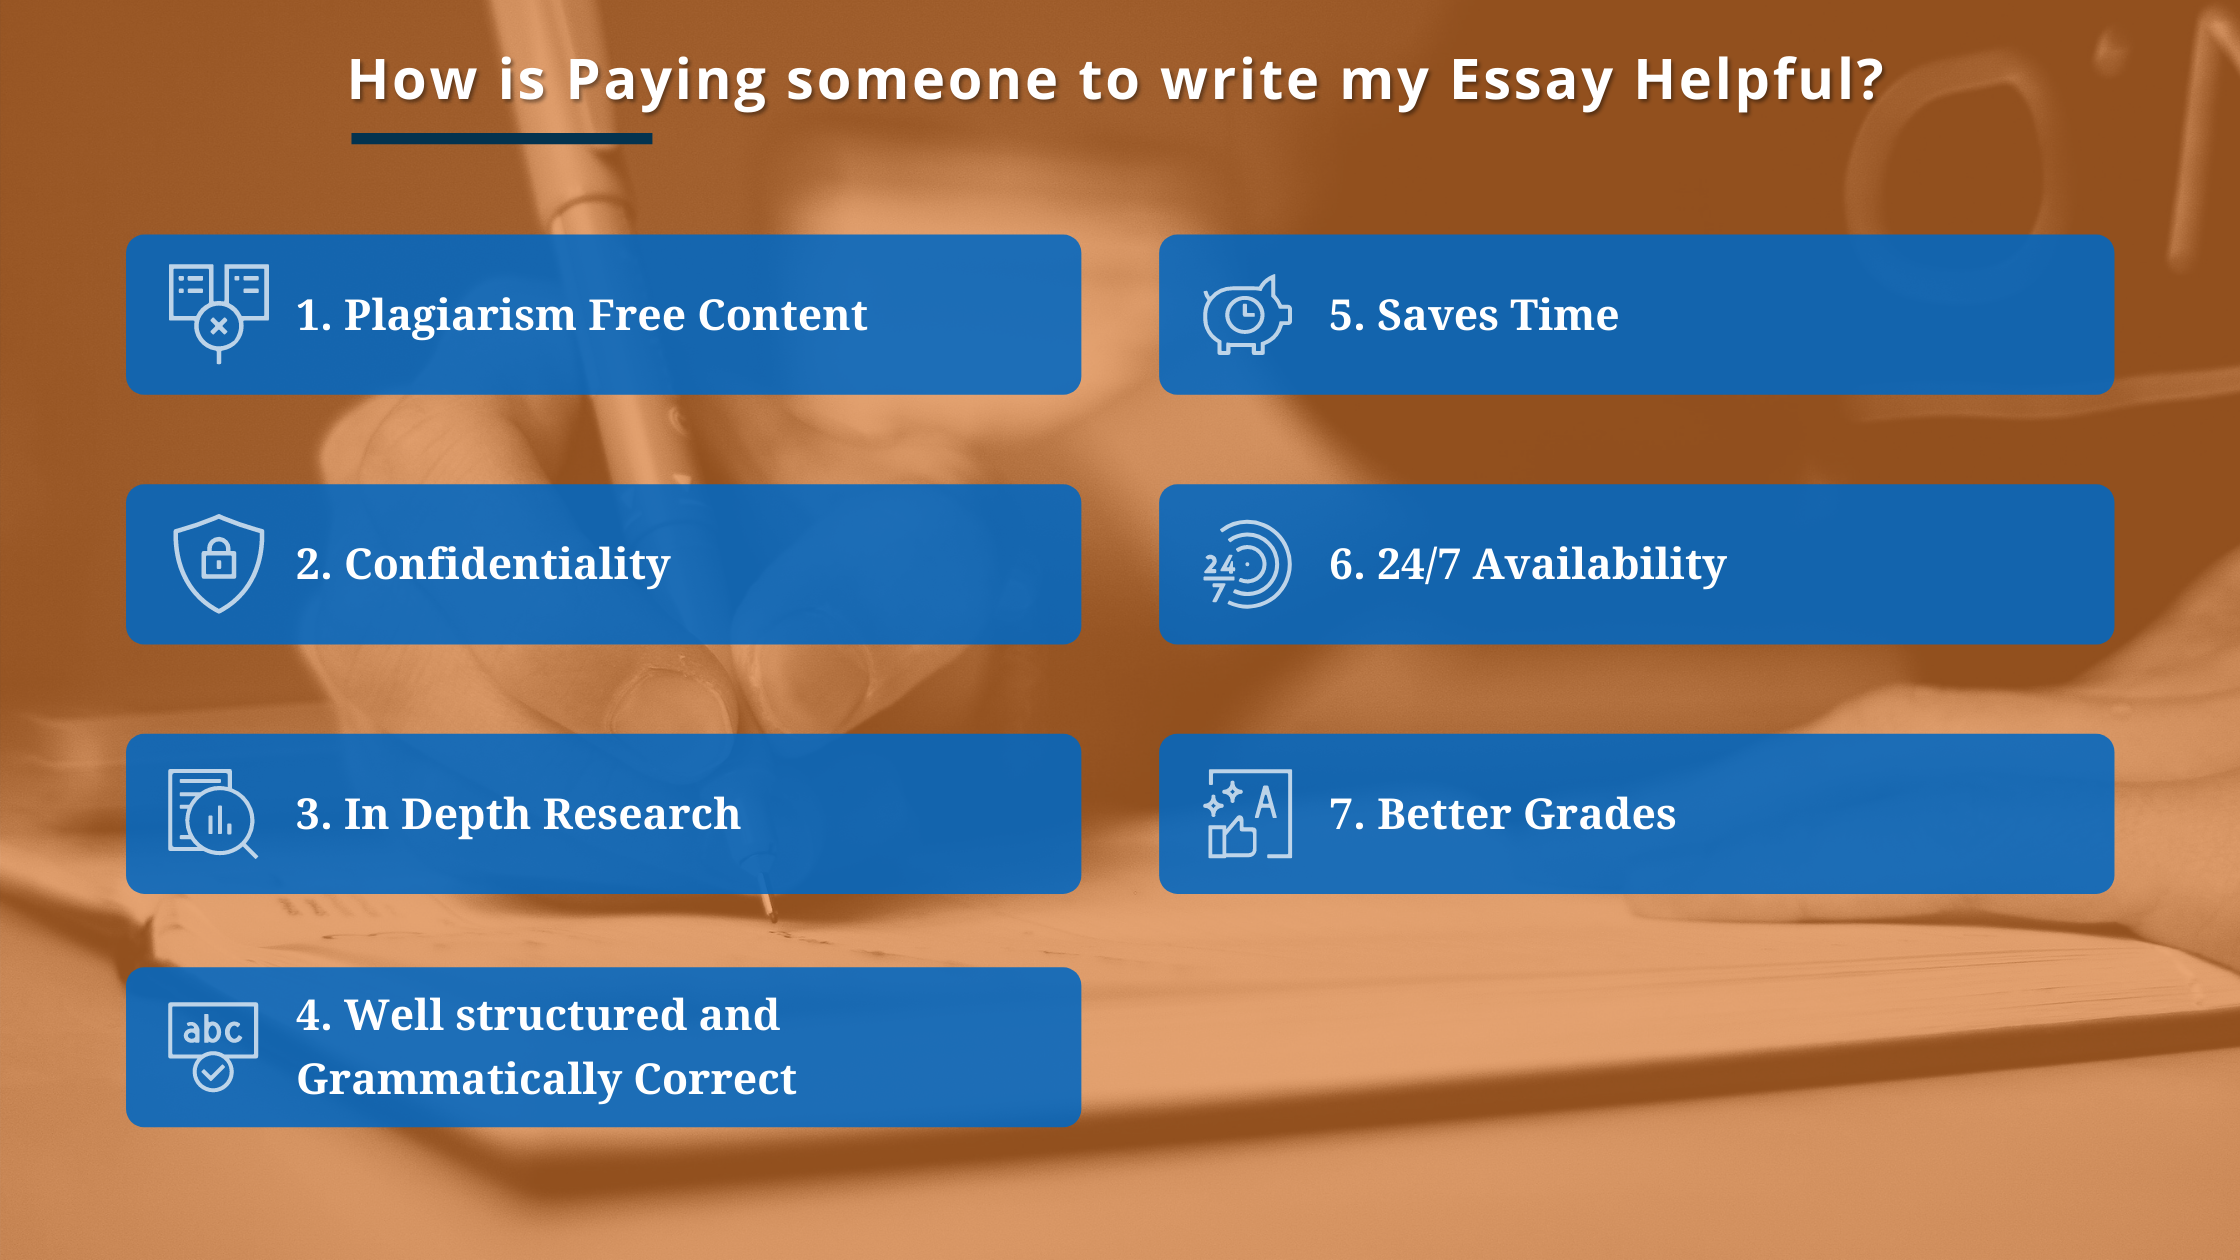 Where Can I Pay Someone to Write My Essay?